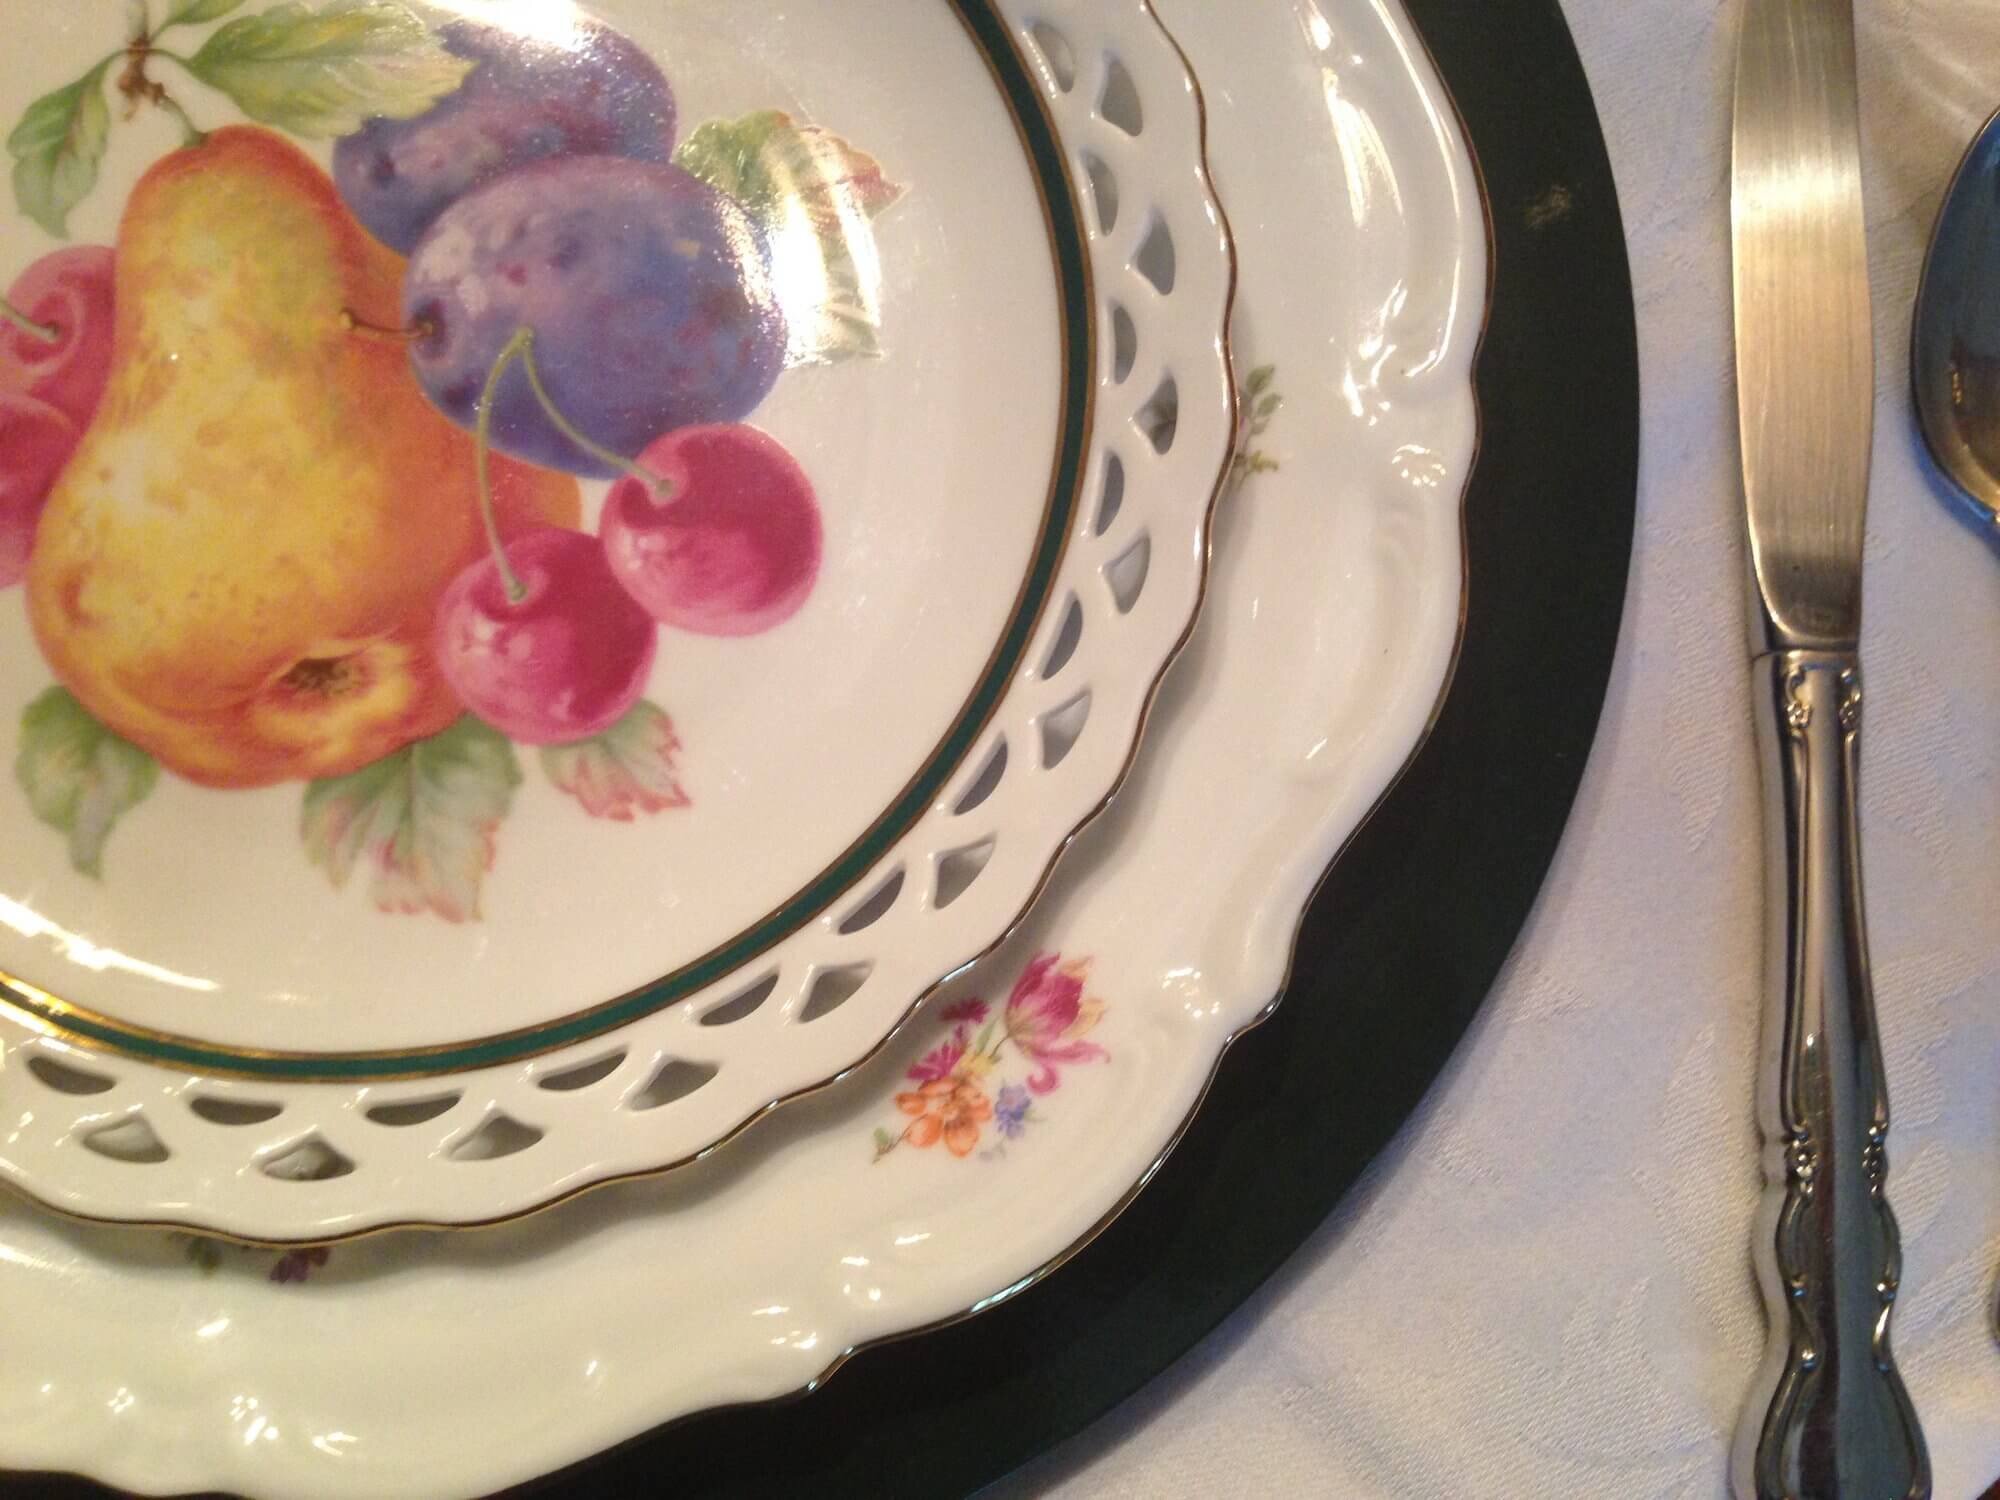 Pierced+antique+fruit+plates+top+vintage+china+dinner+plates,+along+with+basic+table+linens,+flatware,+and+glassware+to+add+a+splash+of+color+and+pattern+to+the+table.jpg